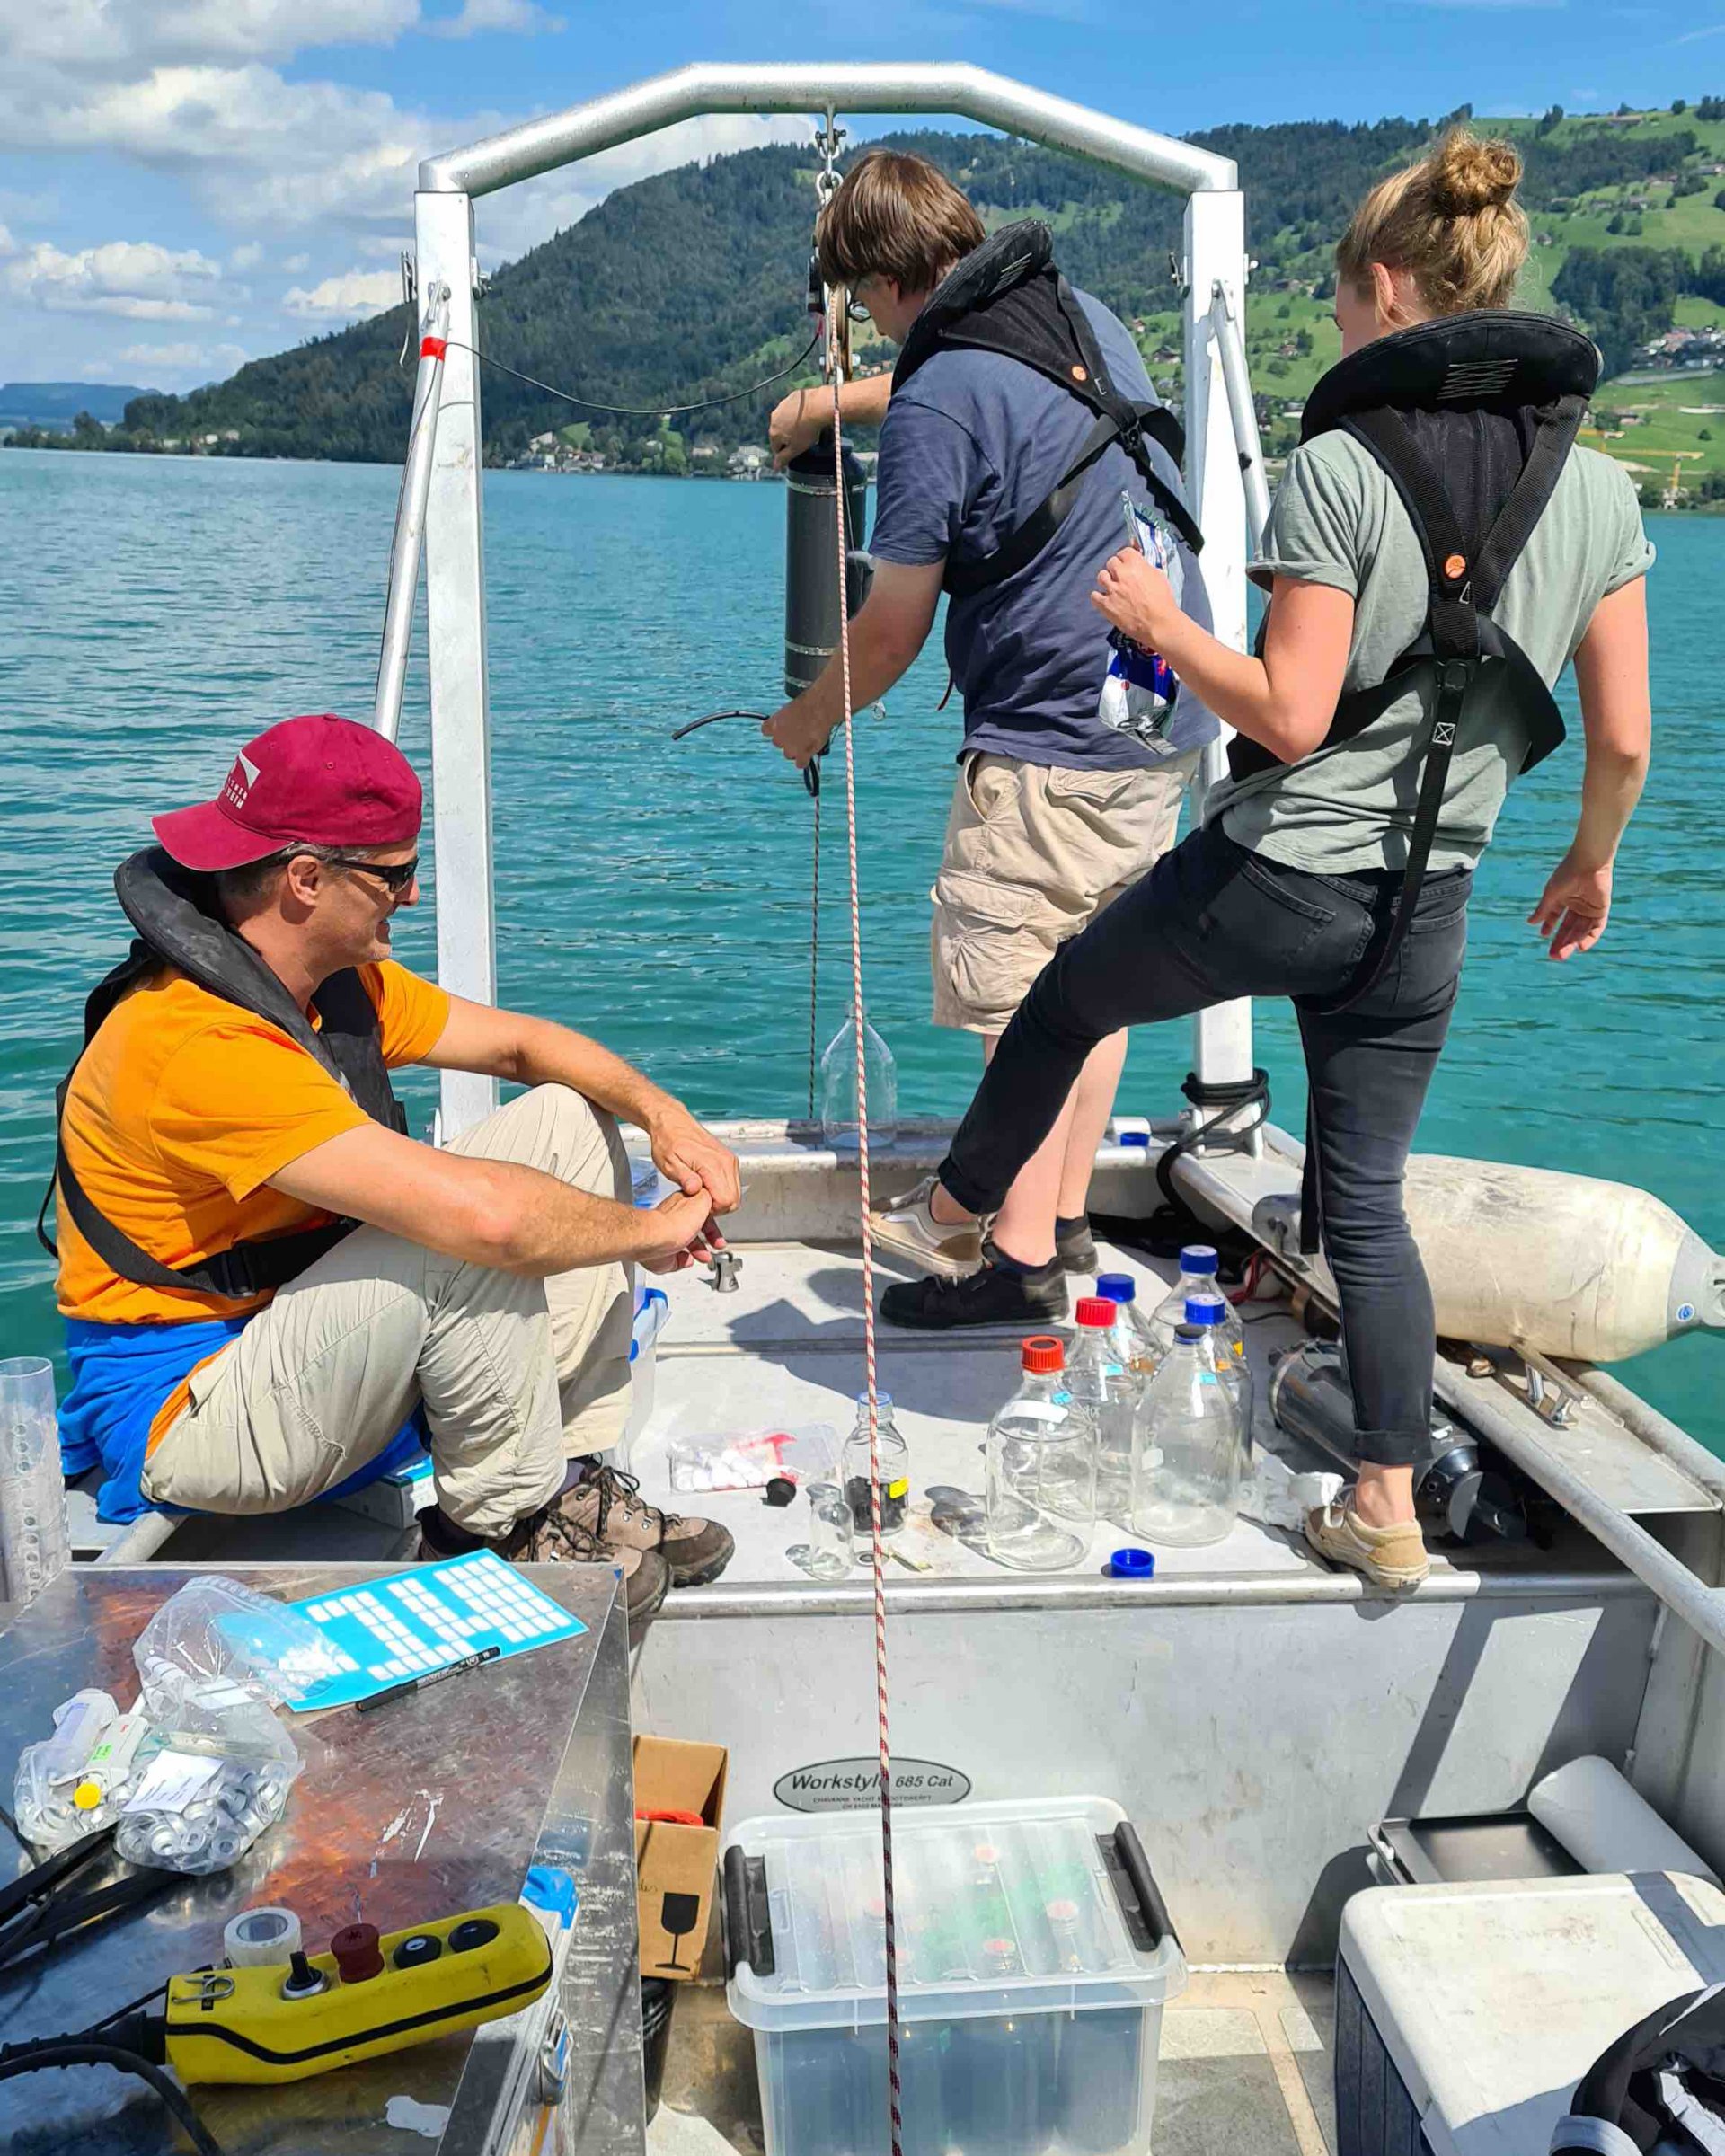 Difficult quest with a nice view: Scientific excursion on Lake Zug in summer. The team takes samples from deep water layers to search for the endosymbiont. (© Max Planck Institute for Marine Microbiology, S. Ahmerkamp)